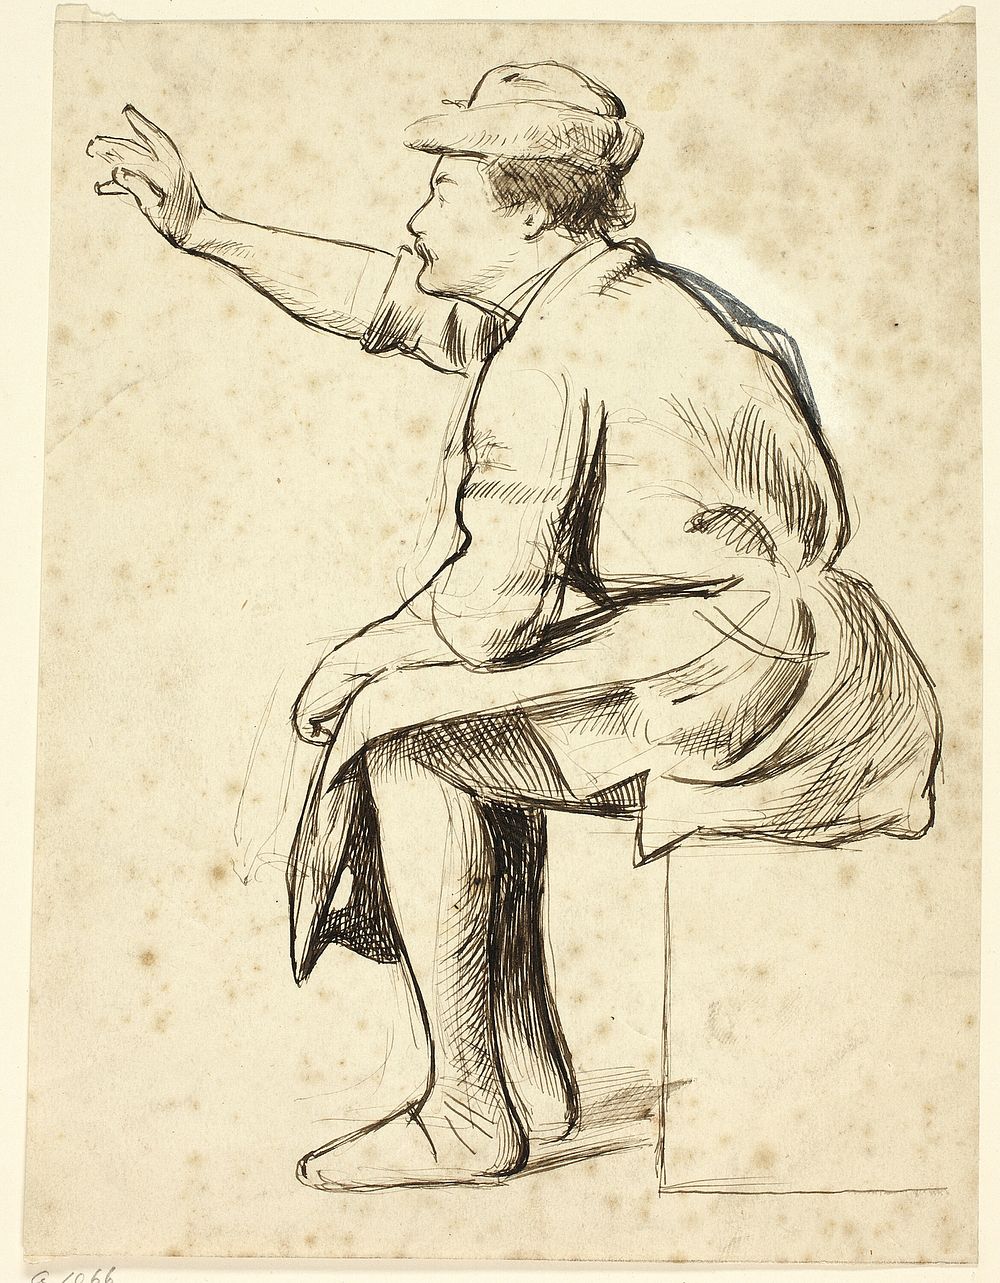 Seated Man with Raised Arm by Henry Stacy Marks